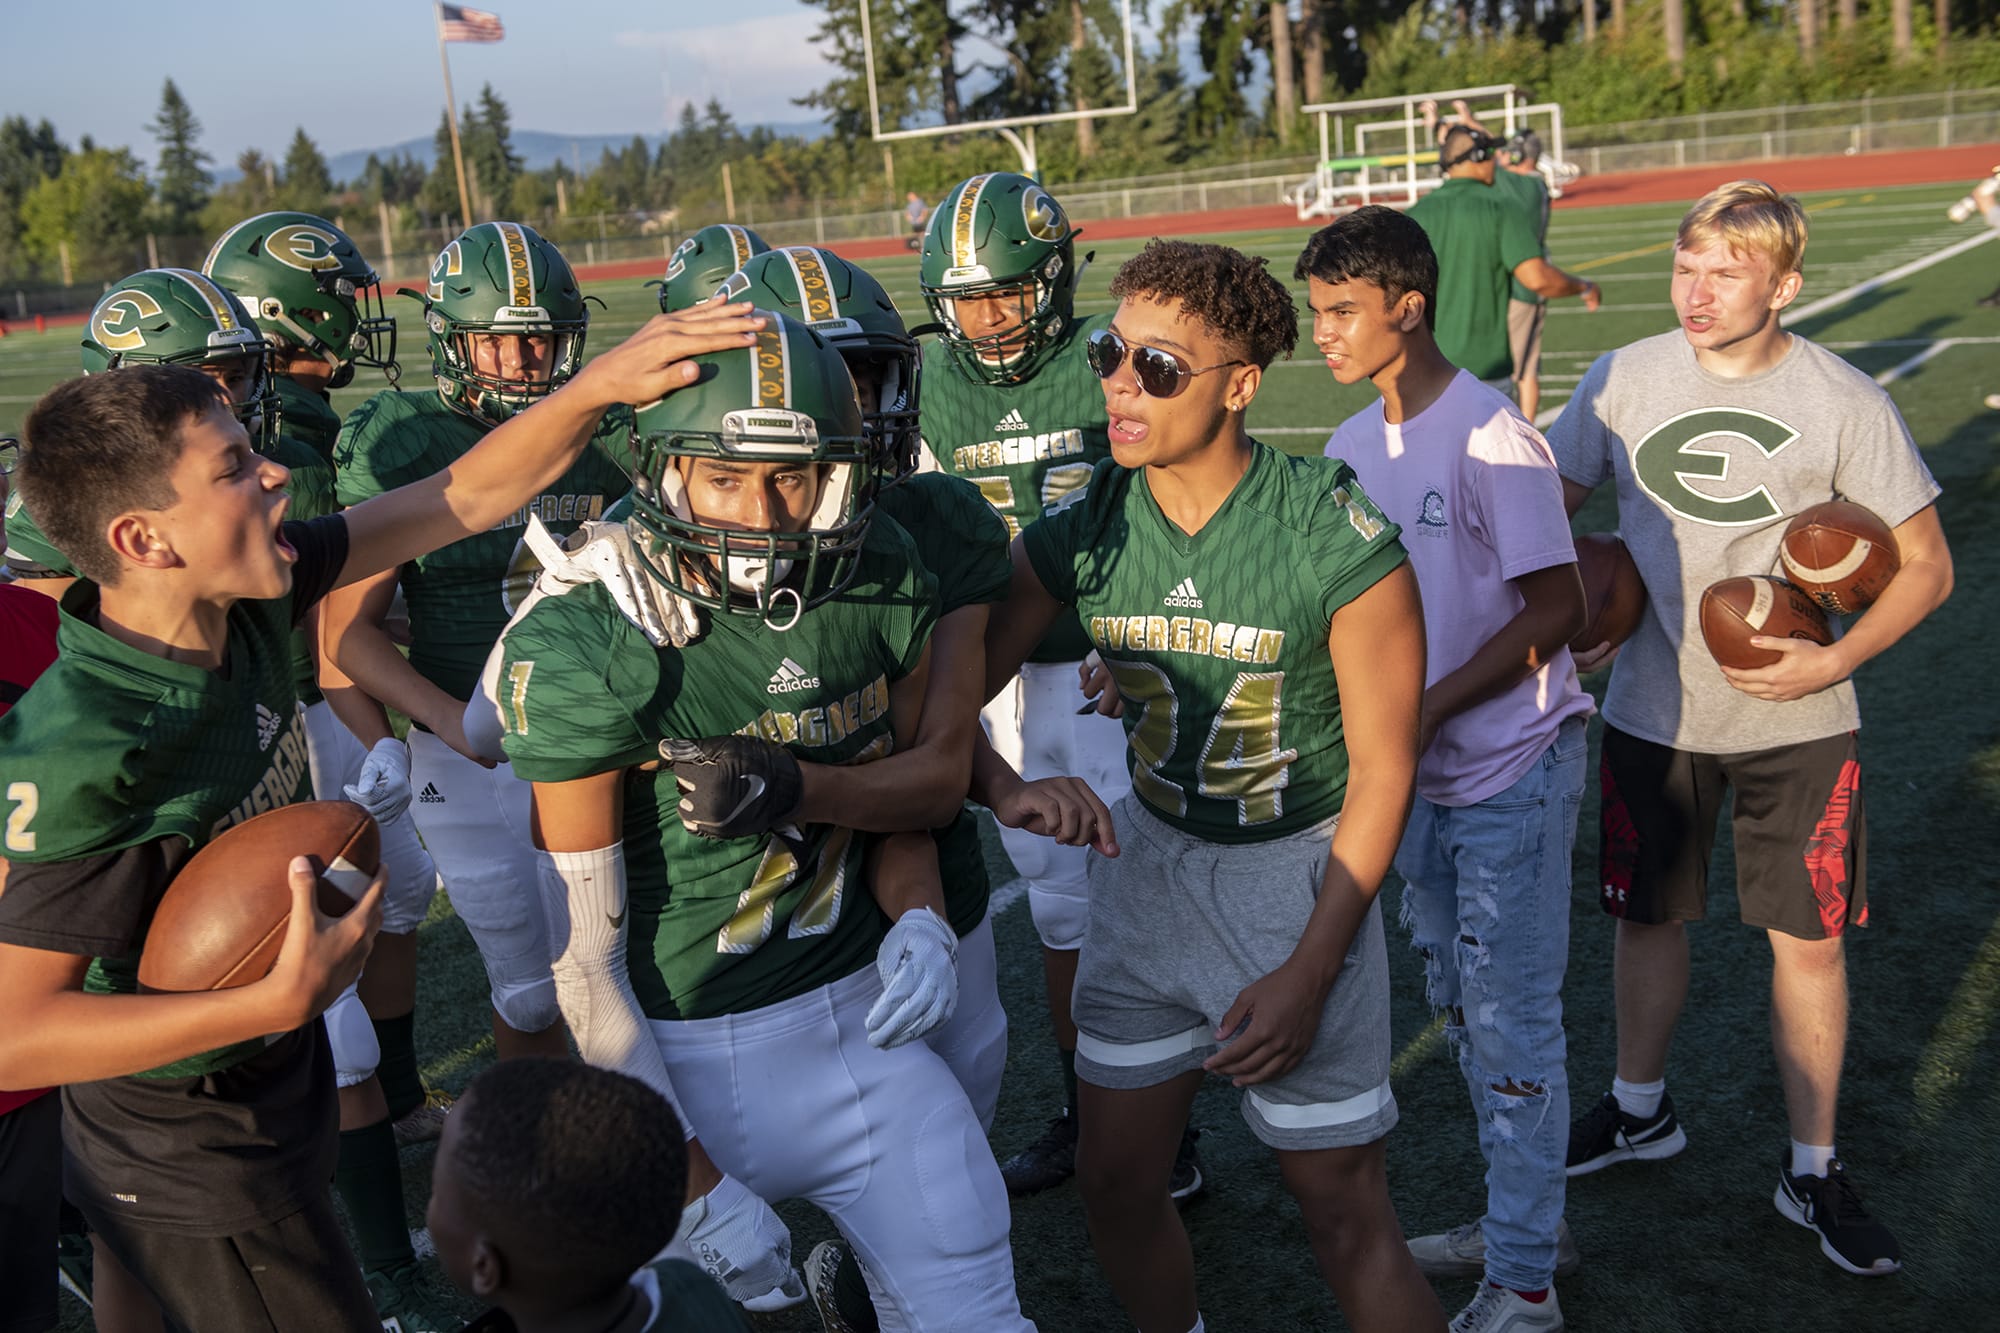 Evergreen’s Shane Newell (17) is congratulated by teammates after making a big play in the third quarter of the season opener at McKenzie Stadium in Vancouver on Friday evening, September 6, 2019.